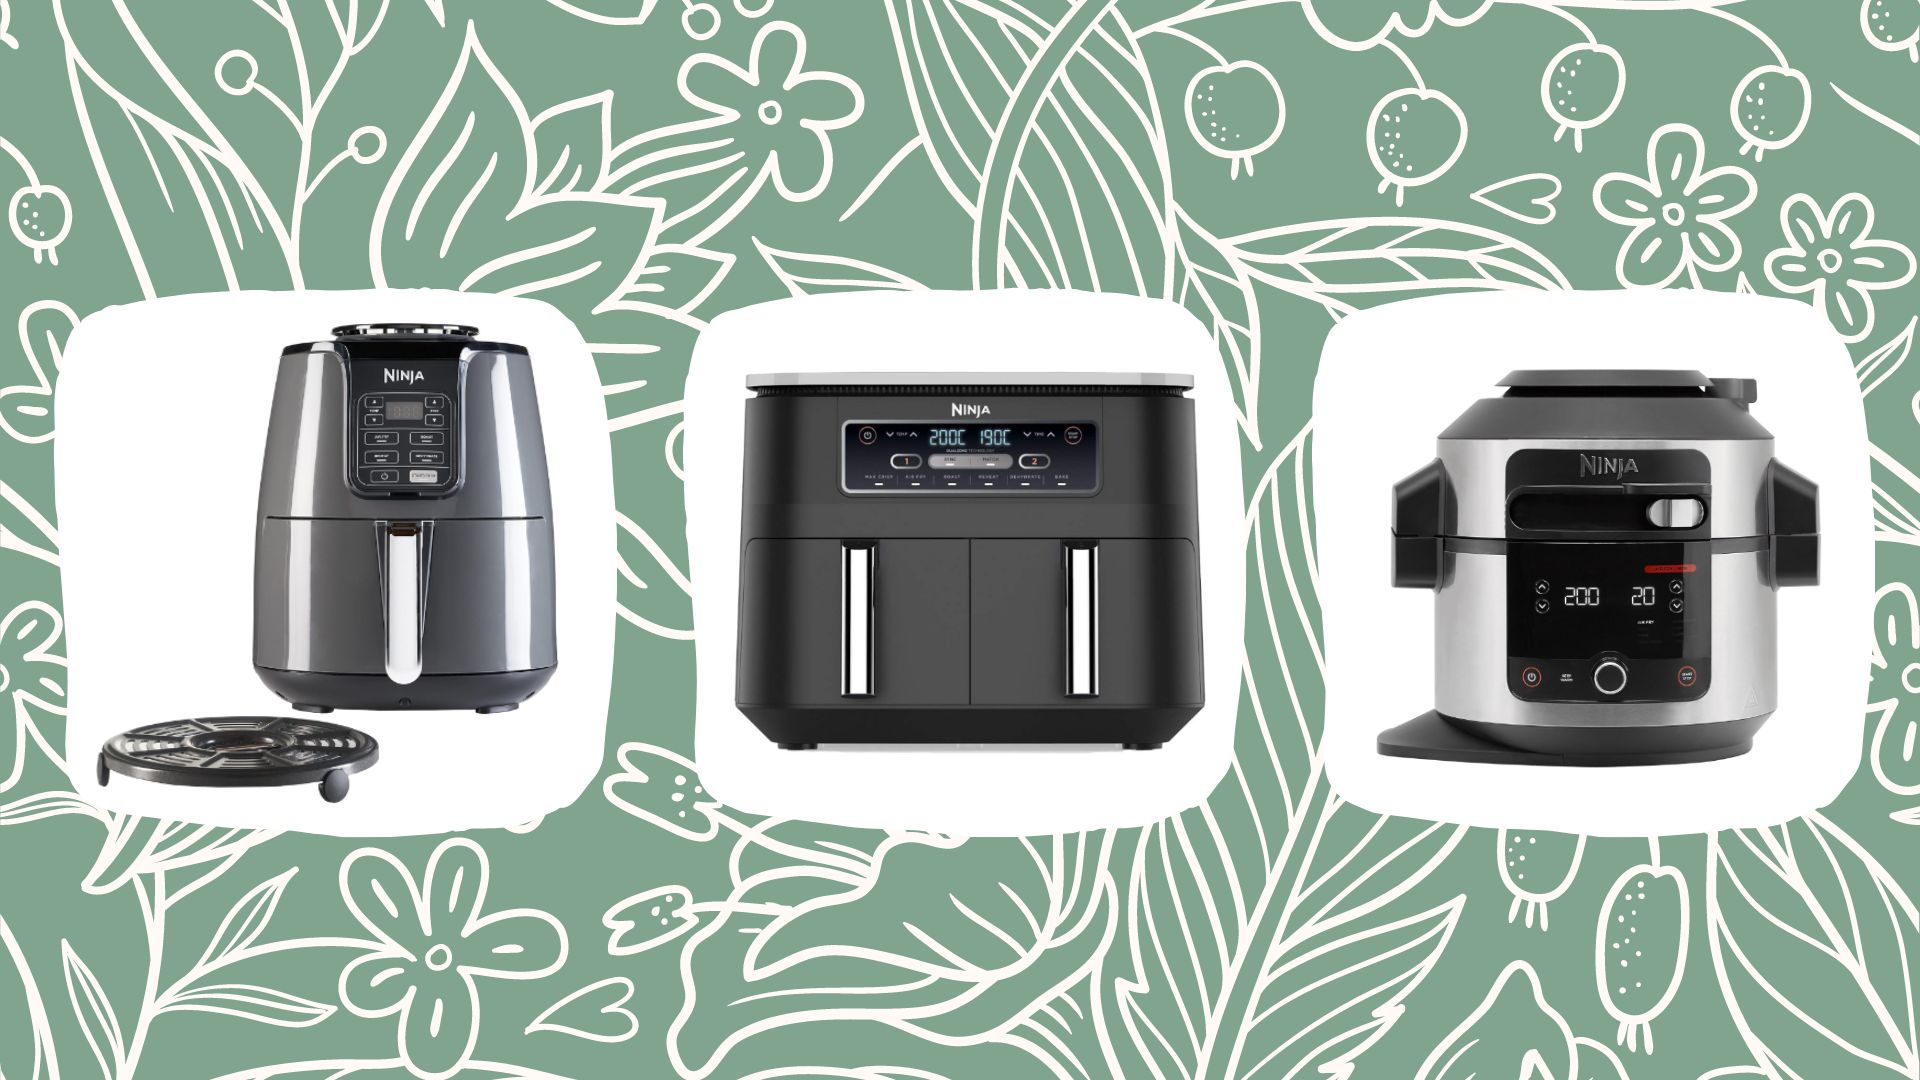 The 8 Very Best Air Fryers of 2023, According to Our Testing